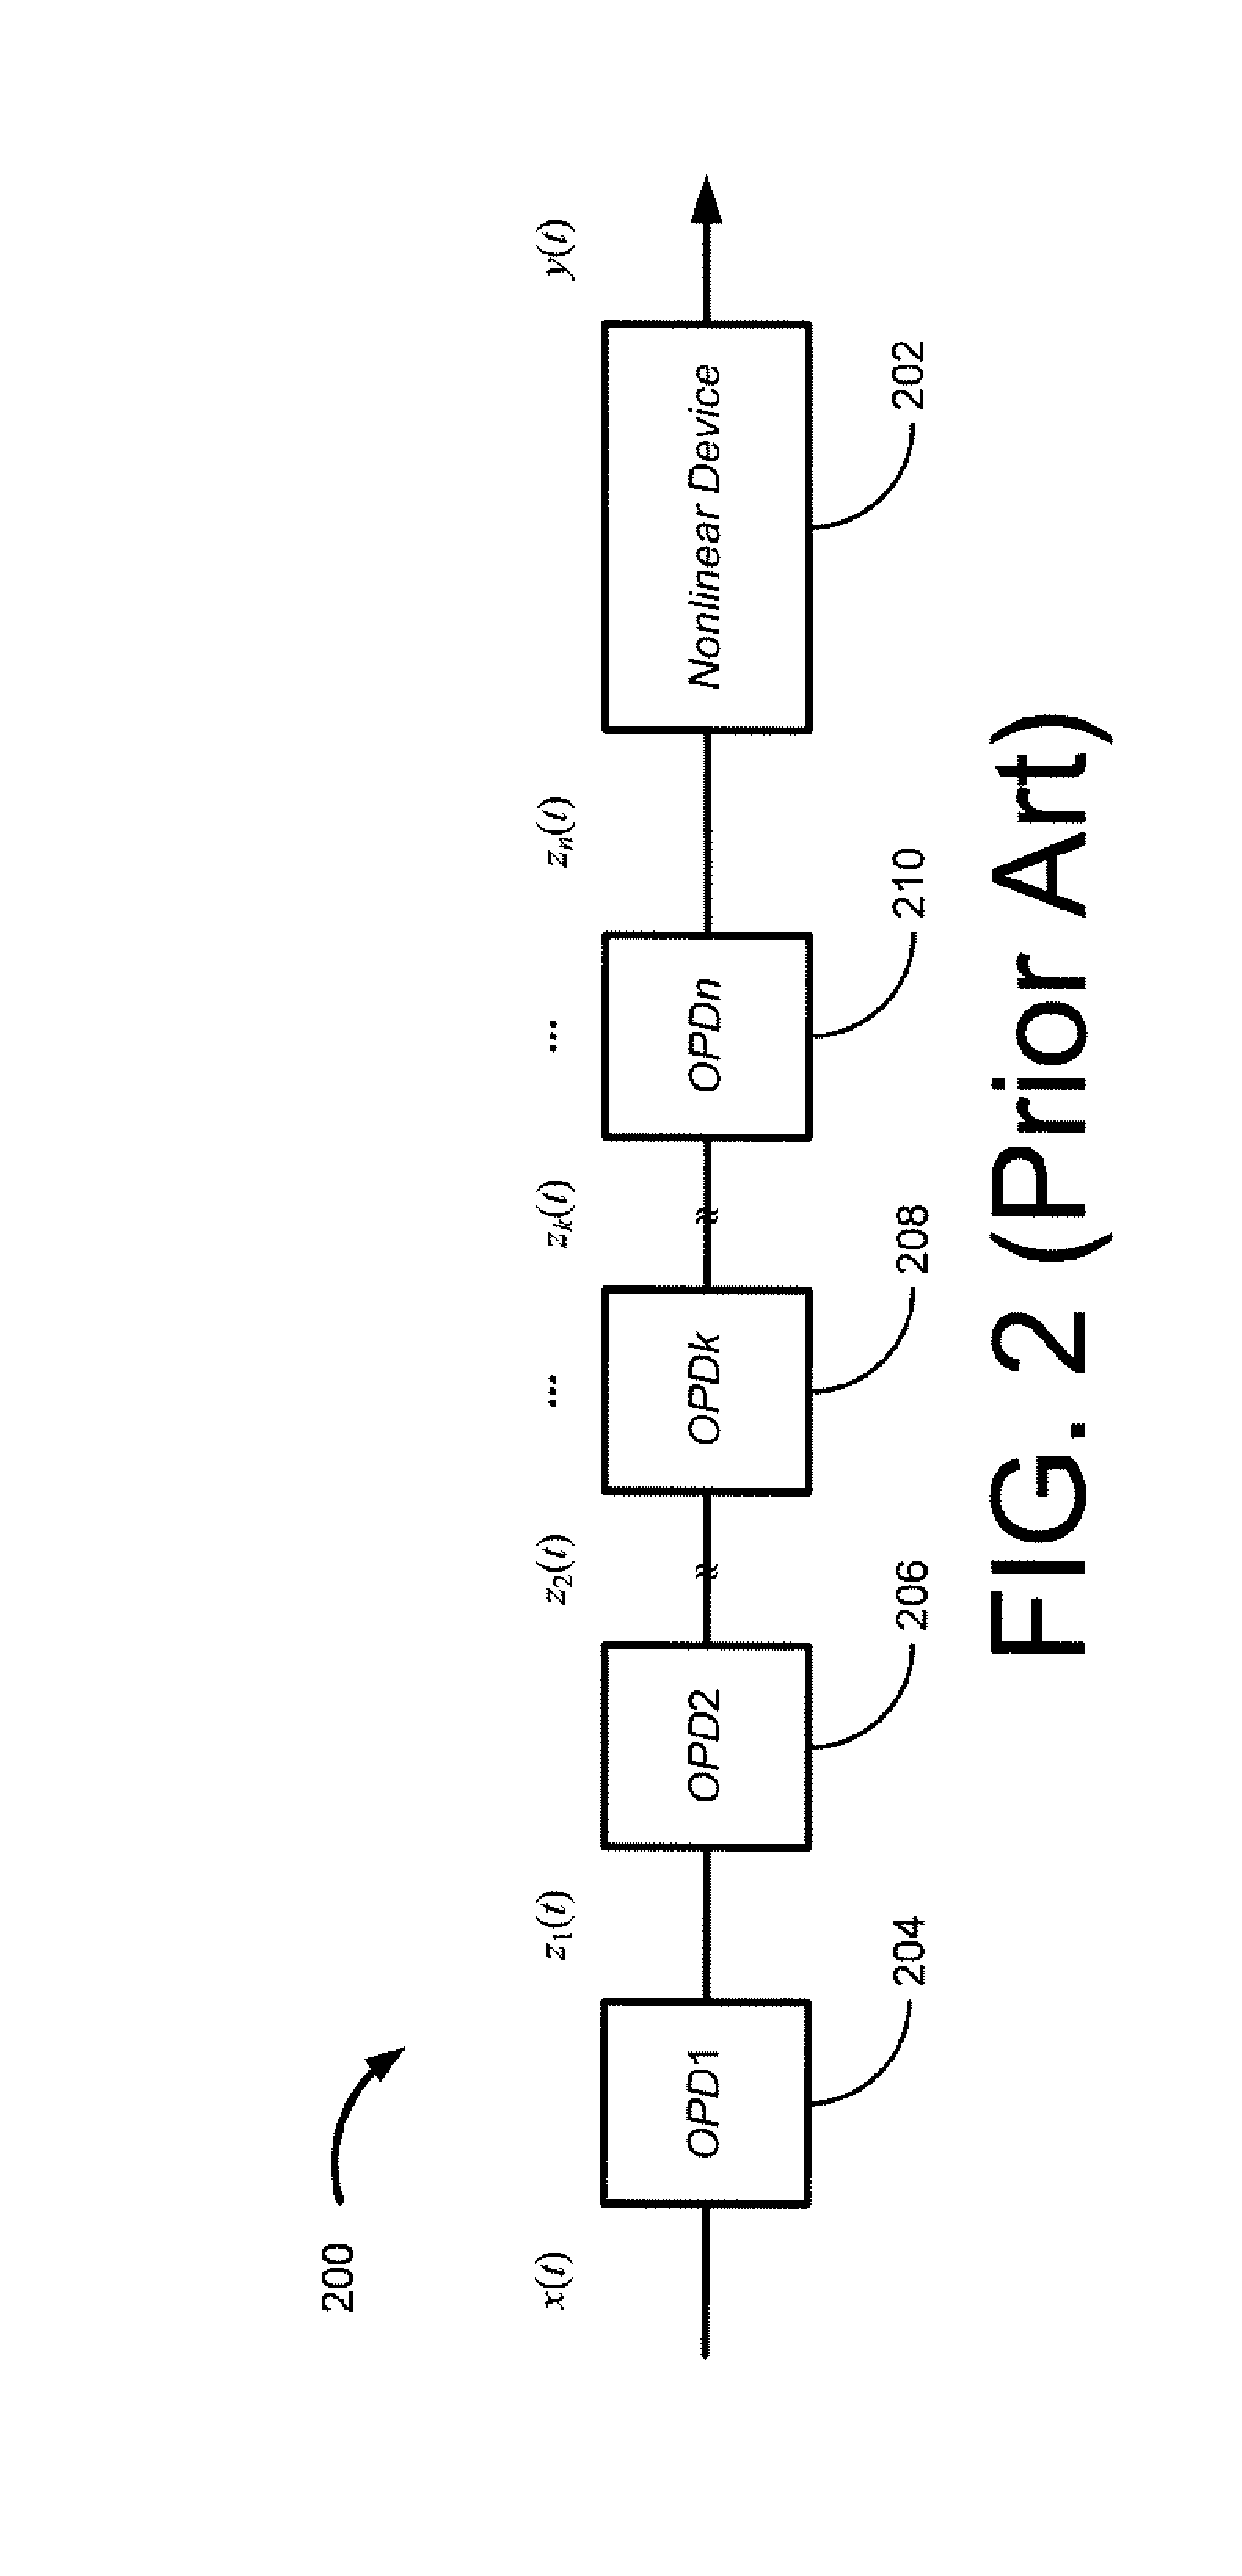 Systems, Methods, and Apparatuses for Multi-Path Orthogonal Recursive Predistortion